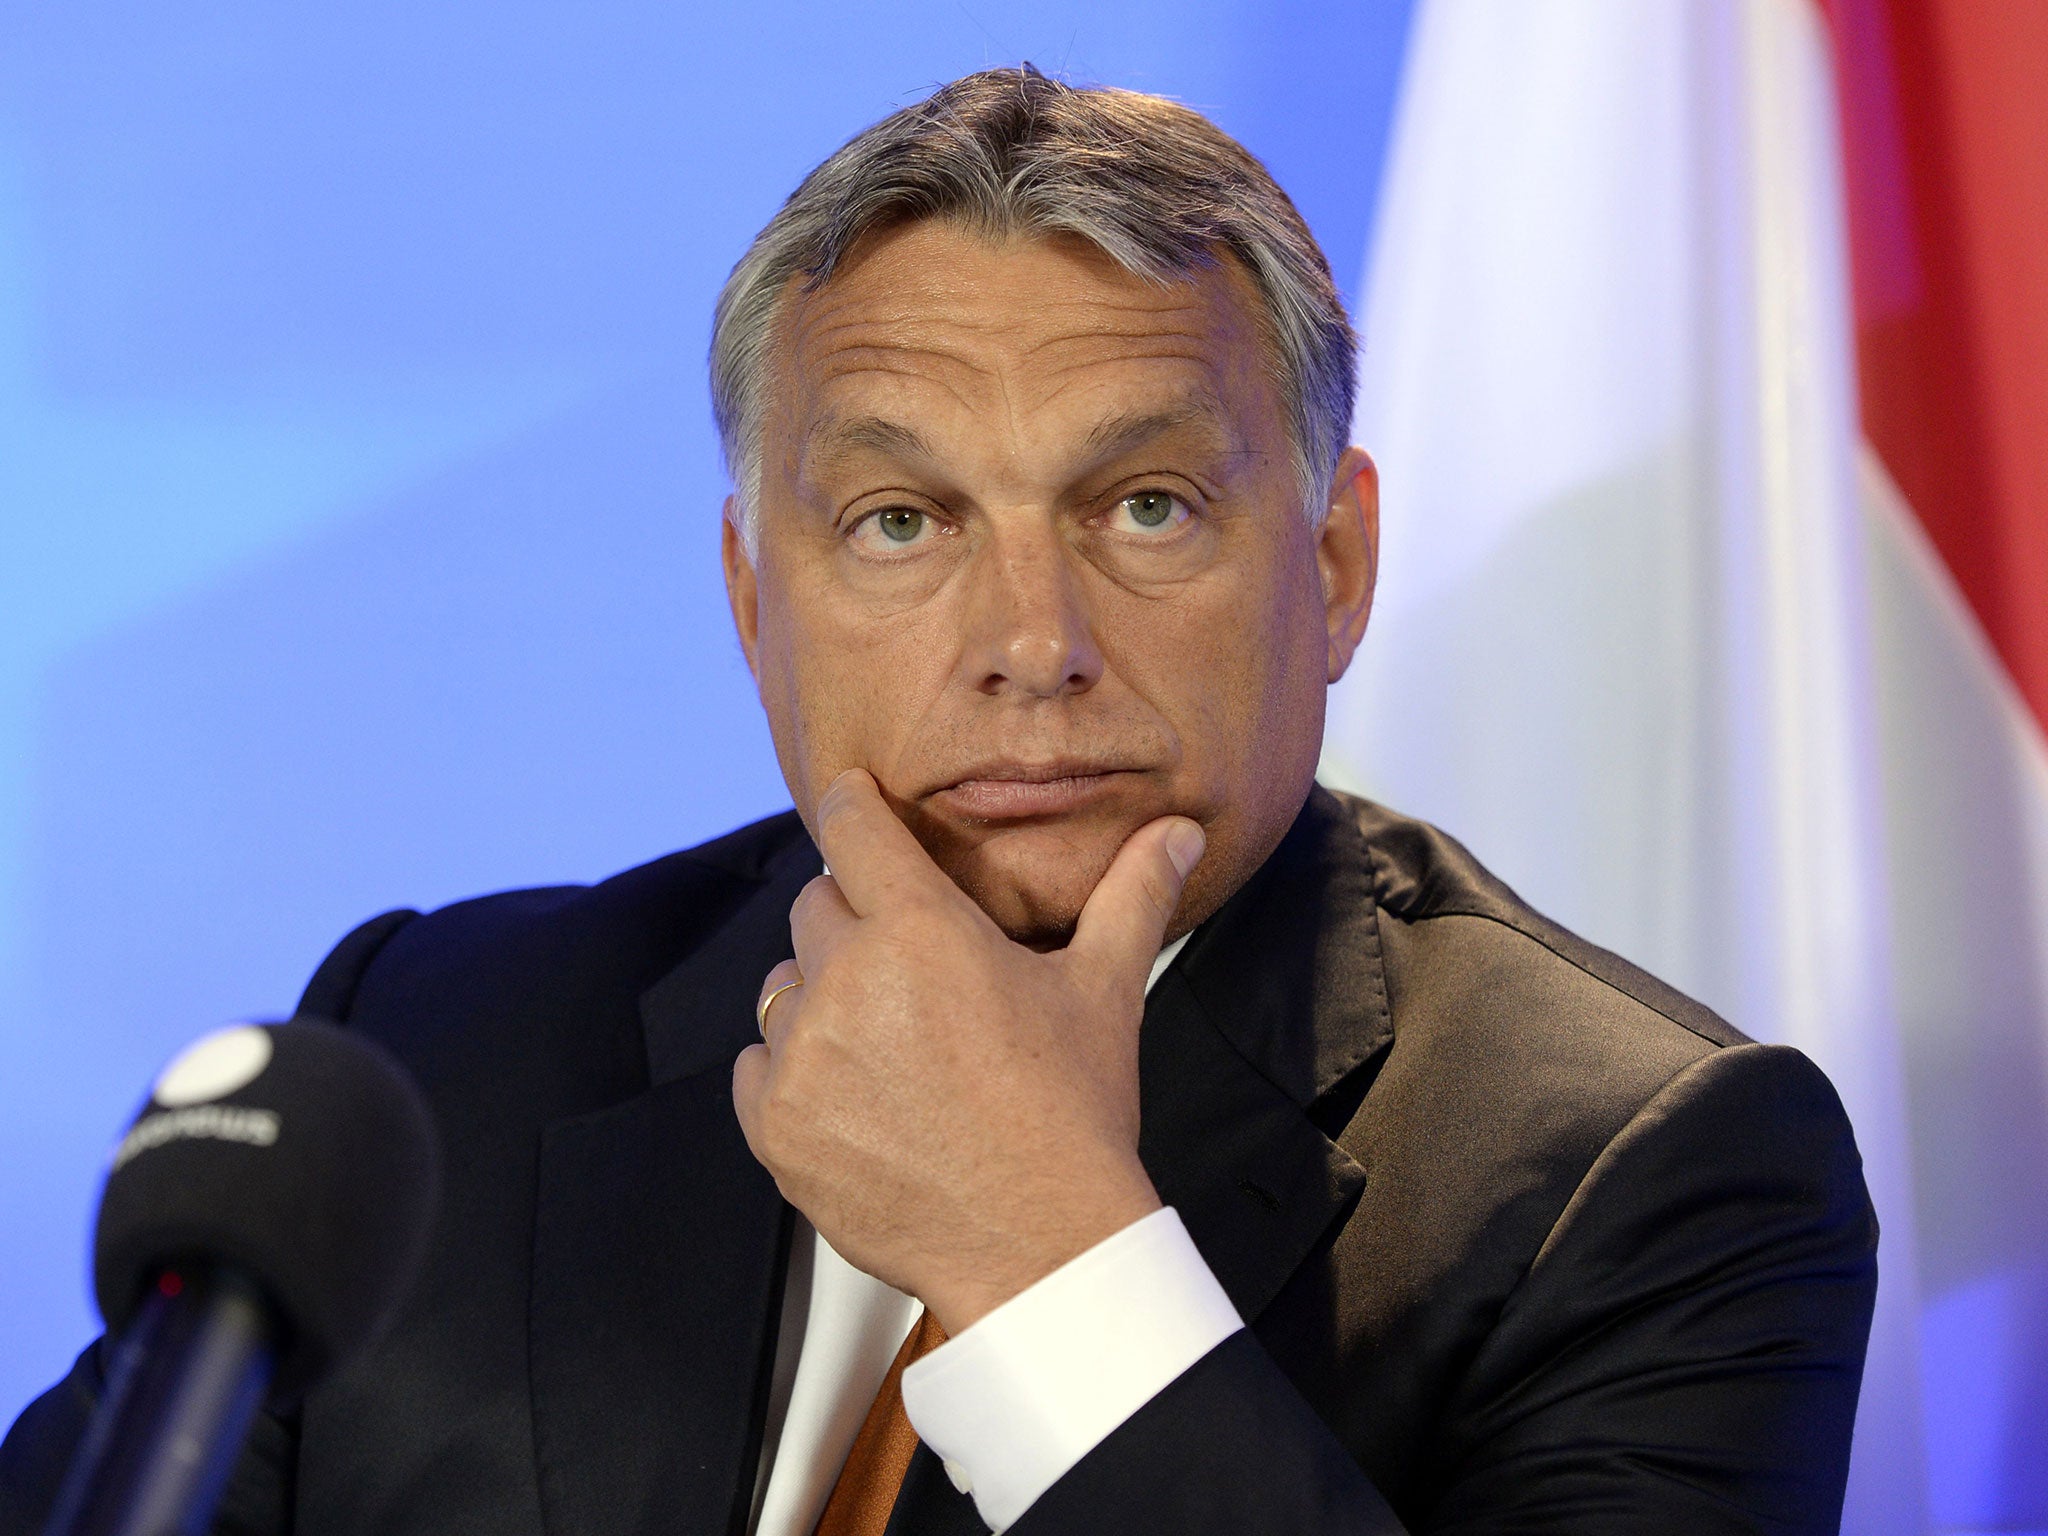 Hungary’s Prime Minister, Viktor Orban, has cited religion as a reason not to welcome Syrian refugees (Getty)